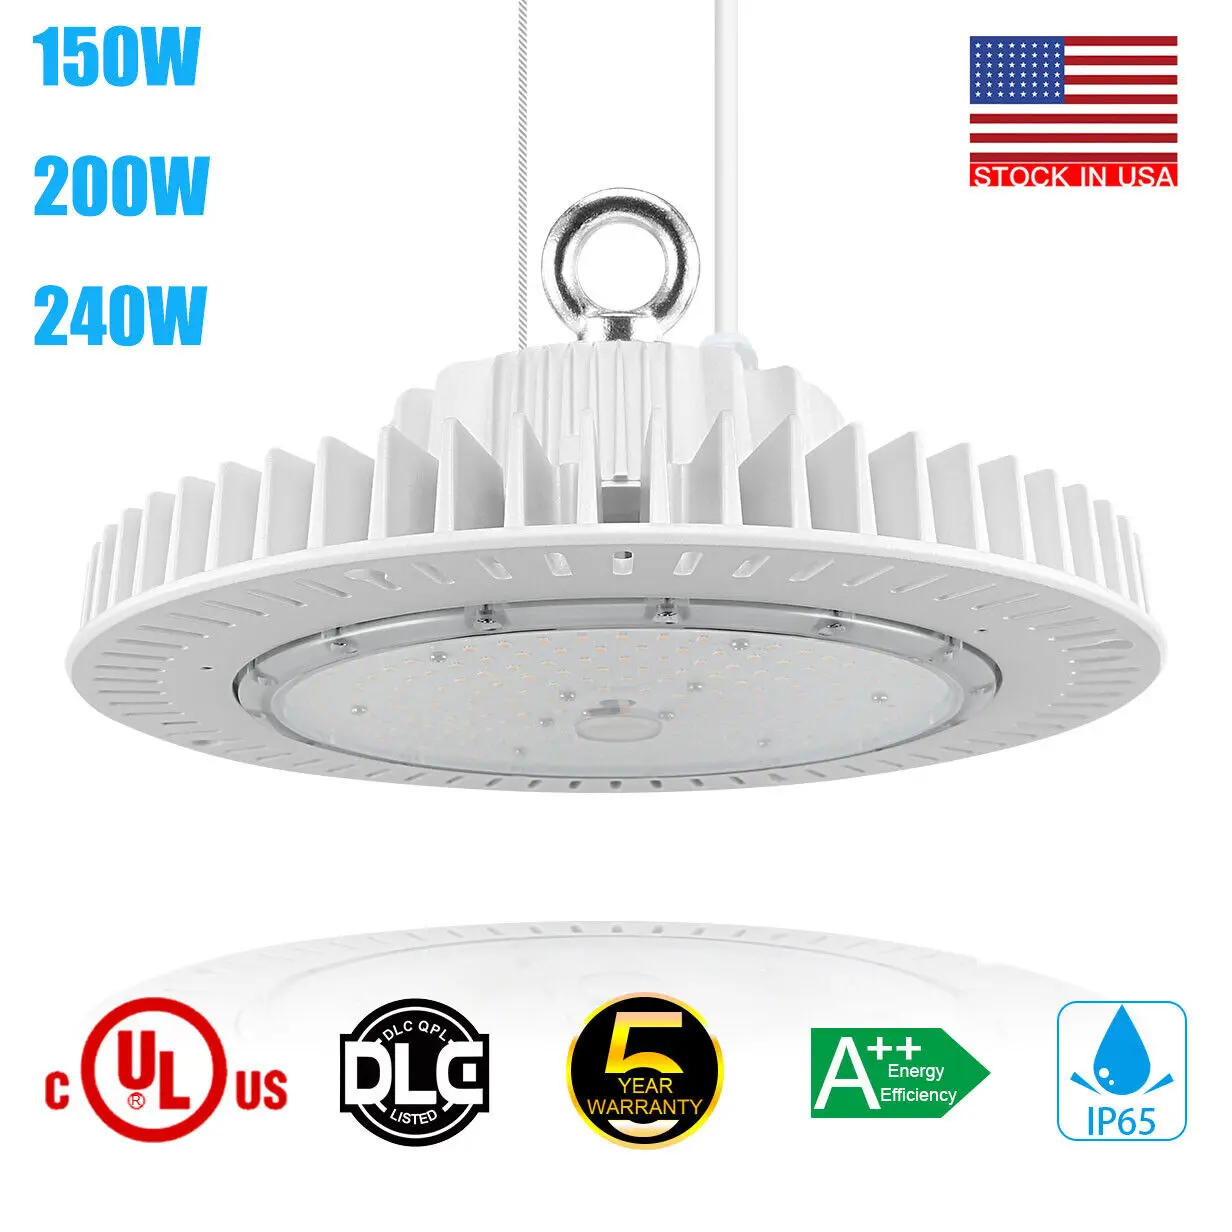 

150W 200W 240W High Bay LED Light AC100-277V UFO Lighting 0-10V Dimmable 5000K Daylight IP65 UL Listed for Warehouse Factory Gym